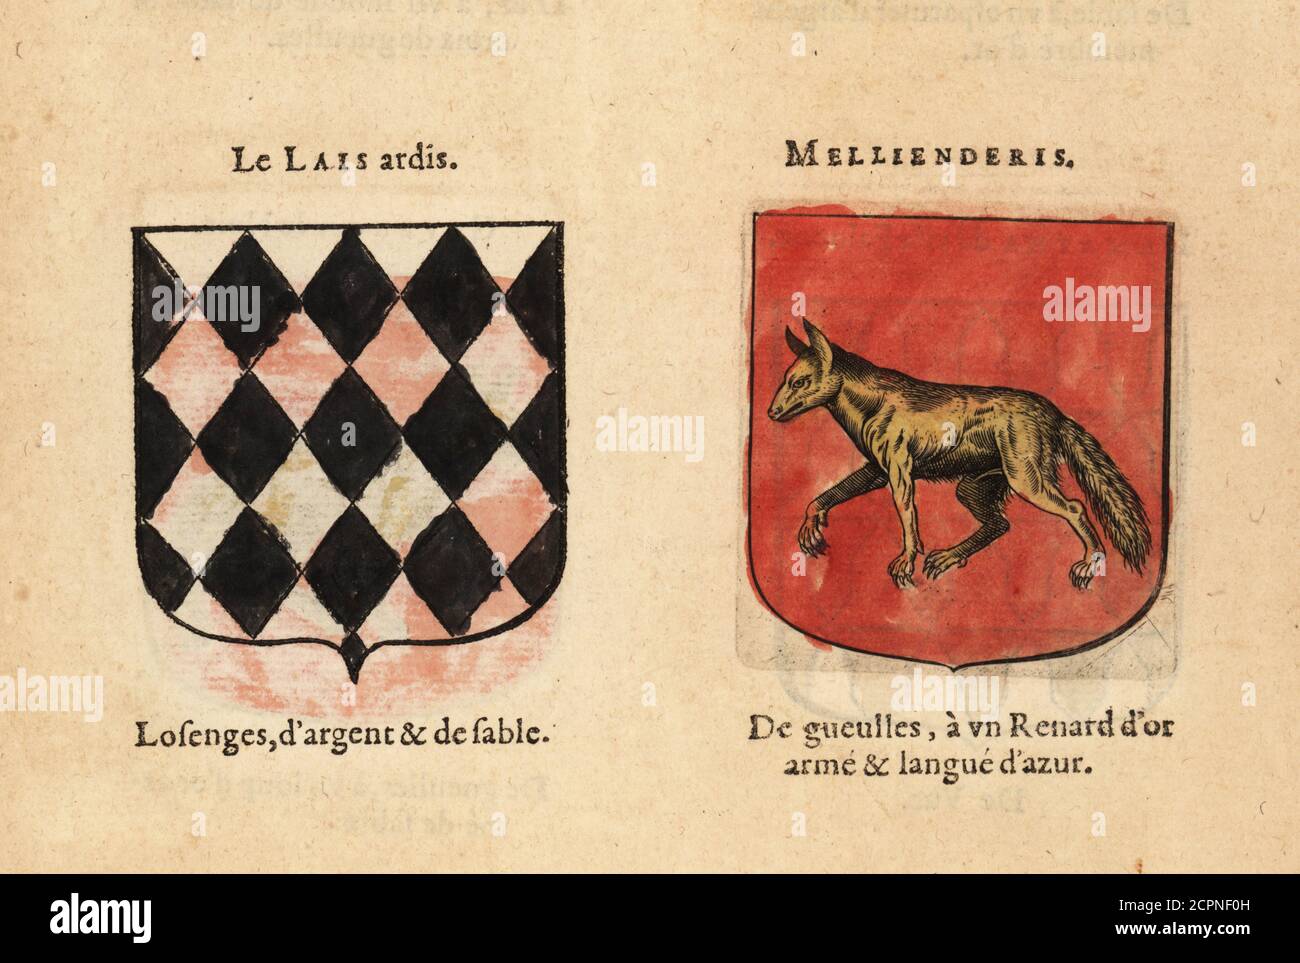 Imaginary coats of arms of the Fourth Chapter of King Arthur’s Knights of the Round Table: Le Laid Hardi, with black and silver losenges, and Meliant de Lis with gold fox on red field. Chevaliers de la table ronde: Le Lais ardis, Mellienderis. Handcoloured woodblock engraving from Hierosme de Bara’s Le Blason des Armoiries, Chez Rolet Boutonne, Paris, 1628 Stock Photo